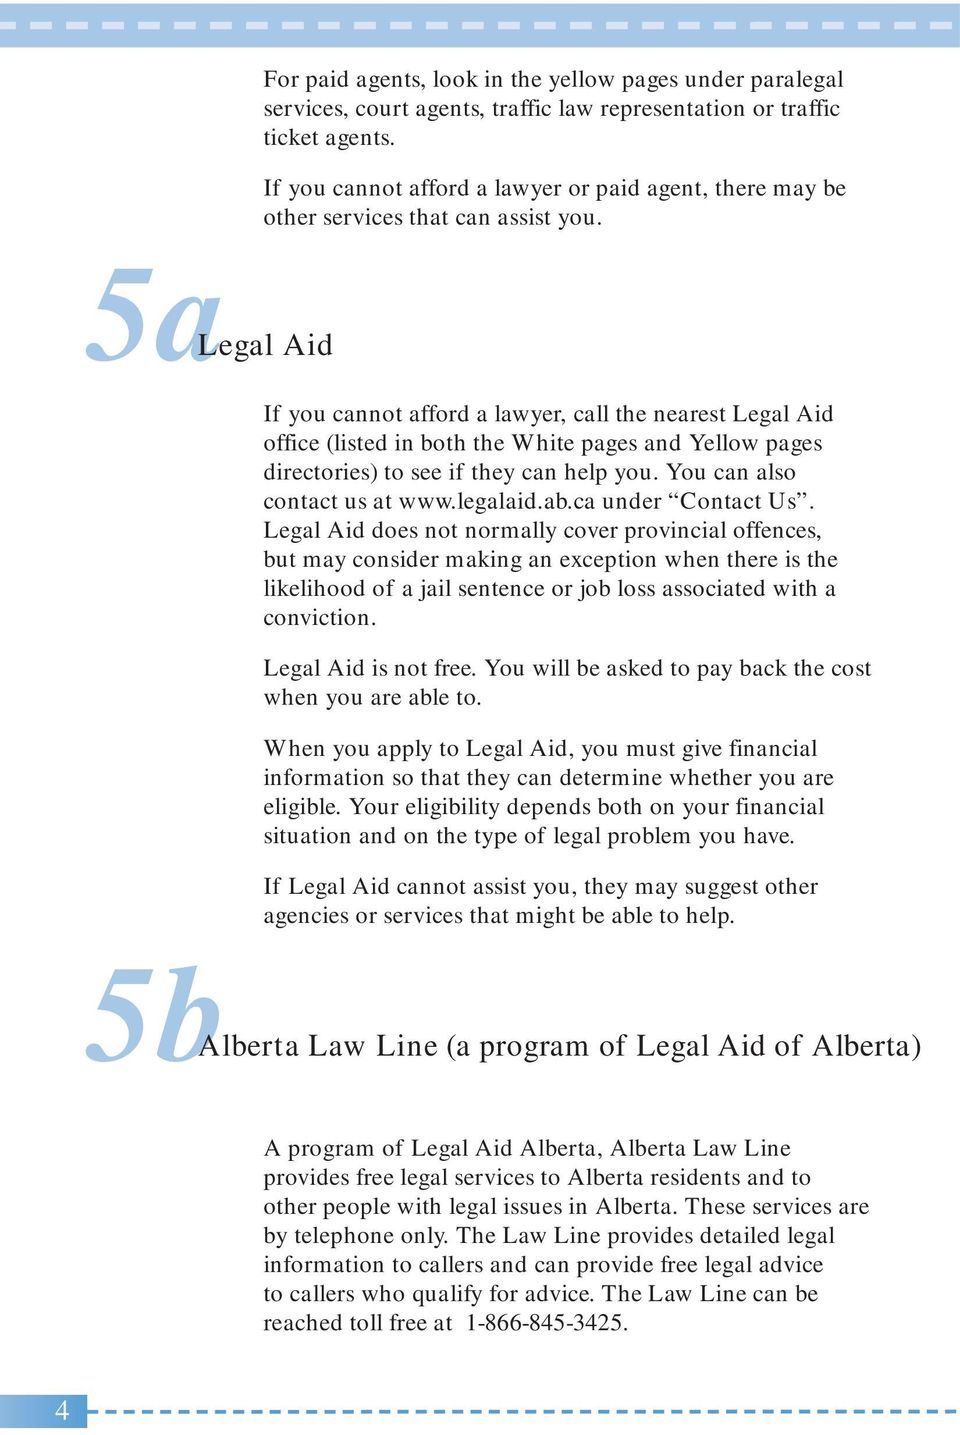 5aLegal Aid If you cannot afford a lawyer, call the nearest Legal Aid office (listed in both the White pages and Yellow pages directories) to see if they can help you. You can also contact us at www.